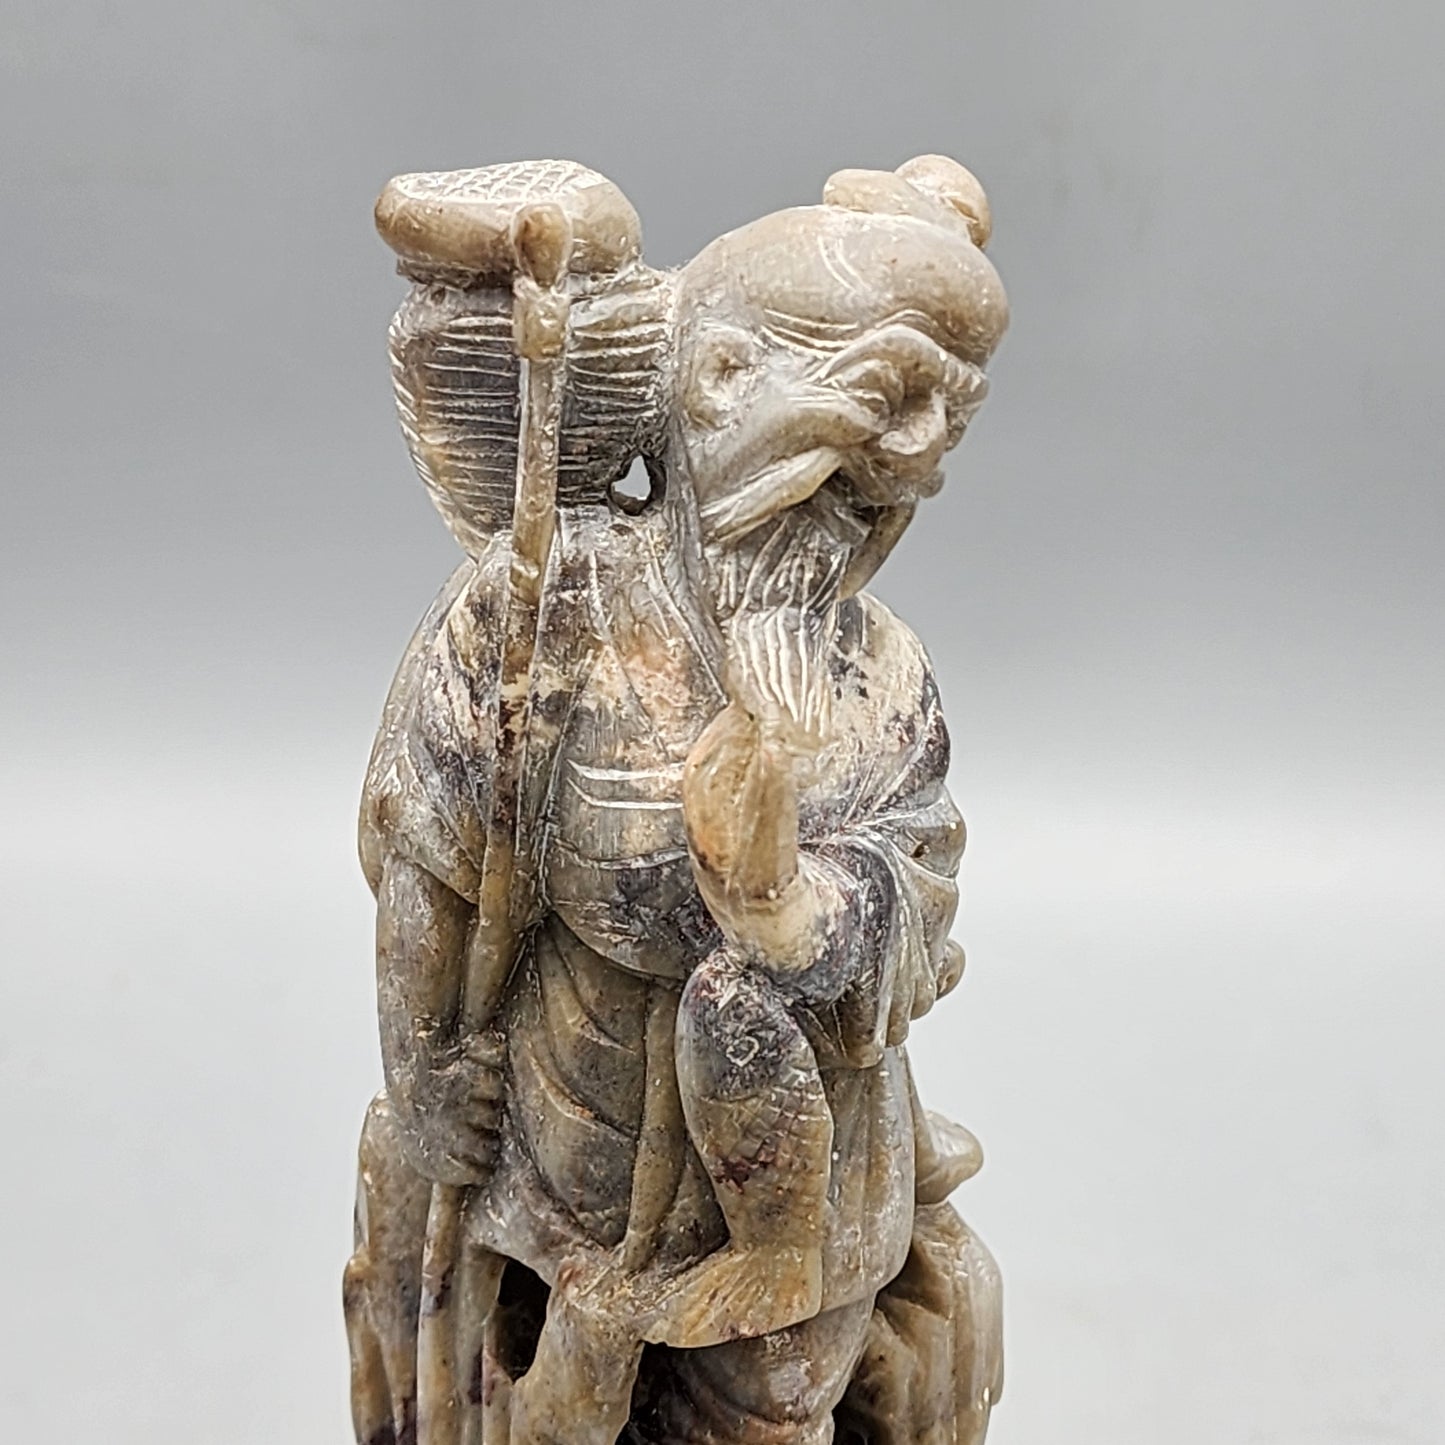 Chinese Soapstone Figure - Old Man with Fish